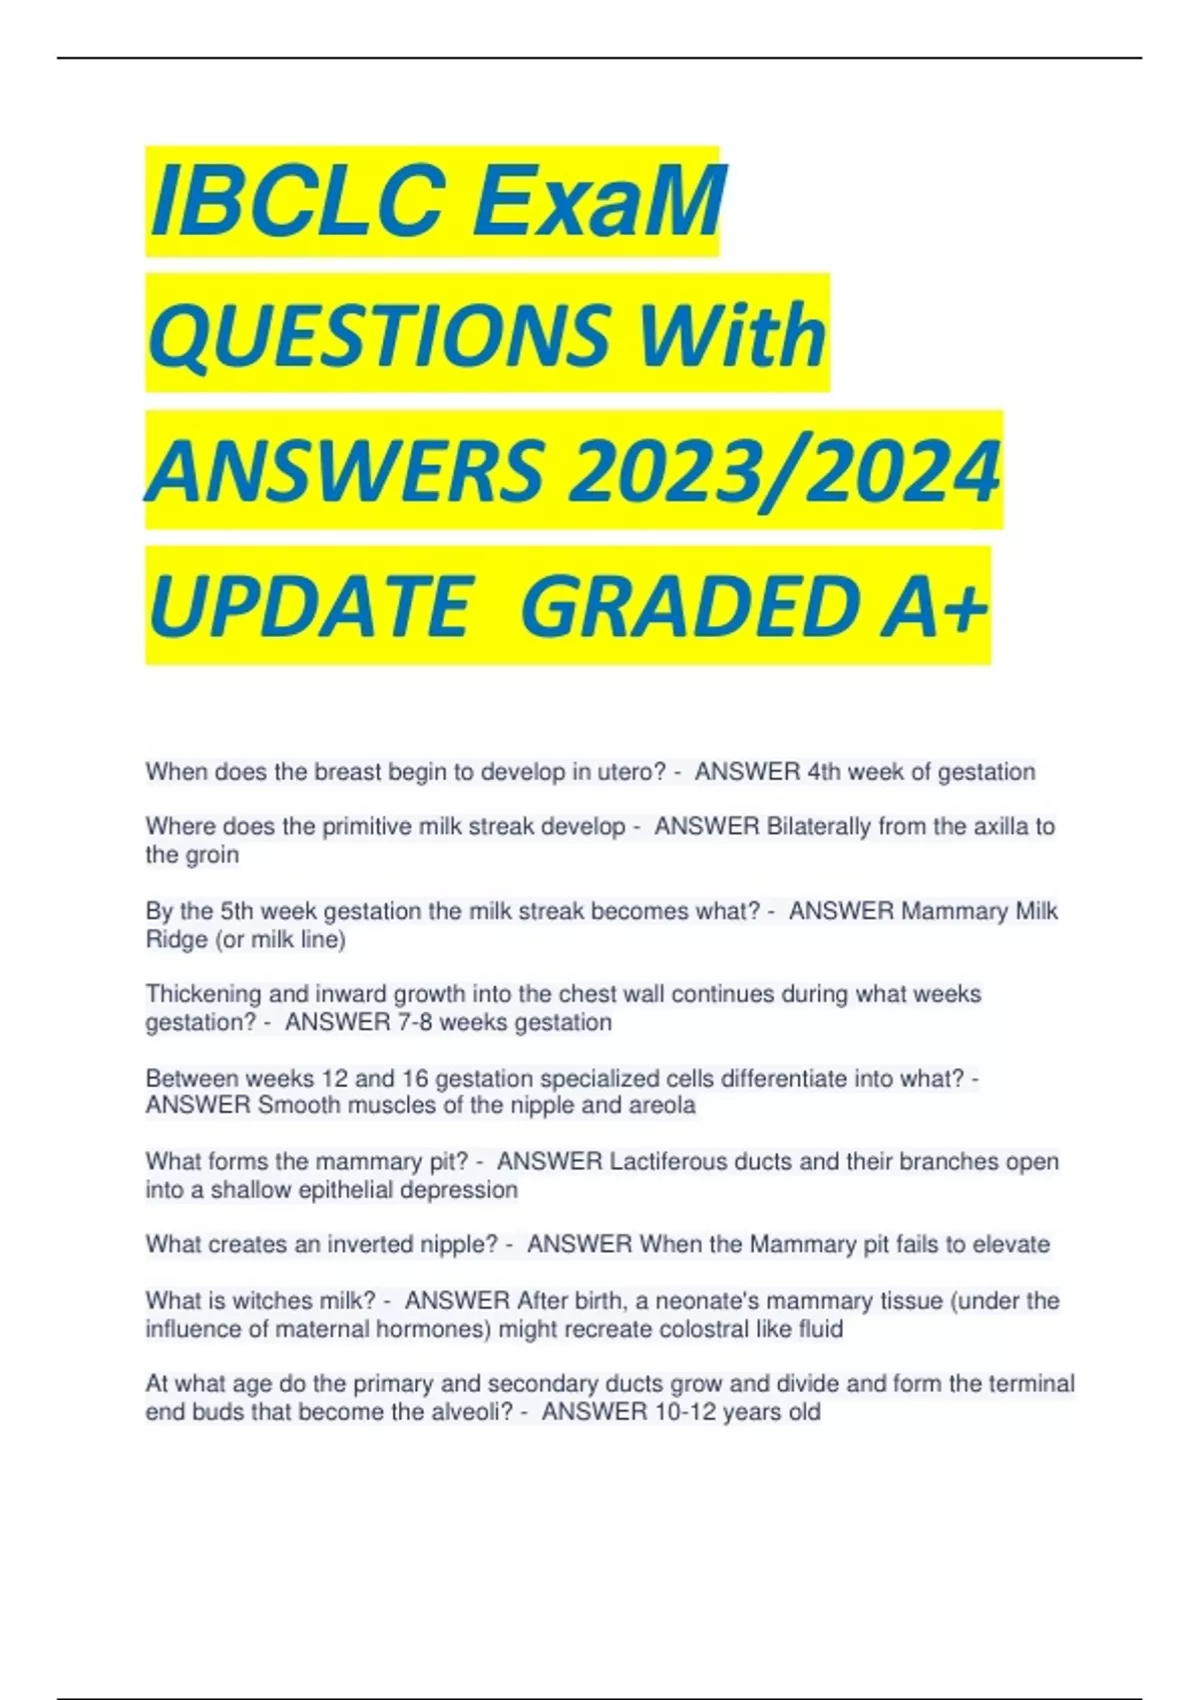 IBCLC ExaM QUESTIONS With ANSWERS 2023/2024 UPDATE GRADED A+ IBCLC